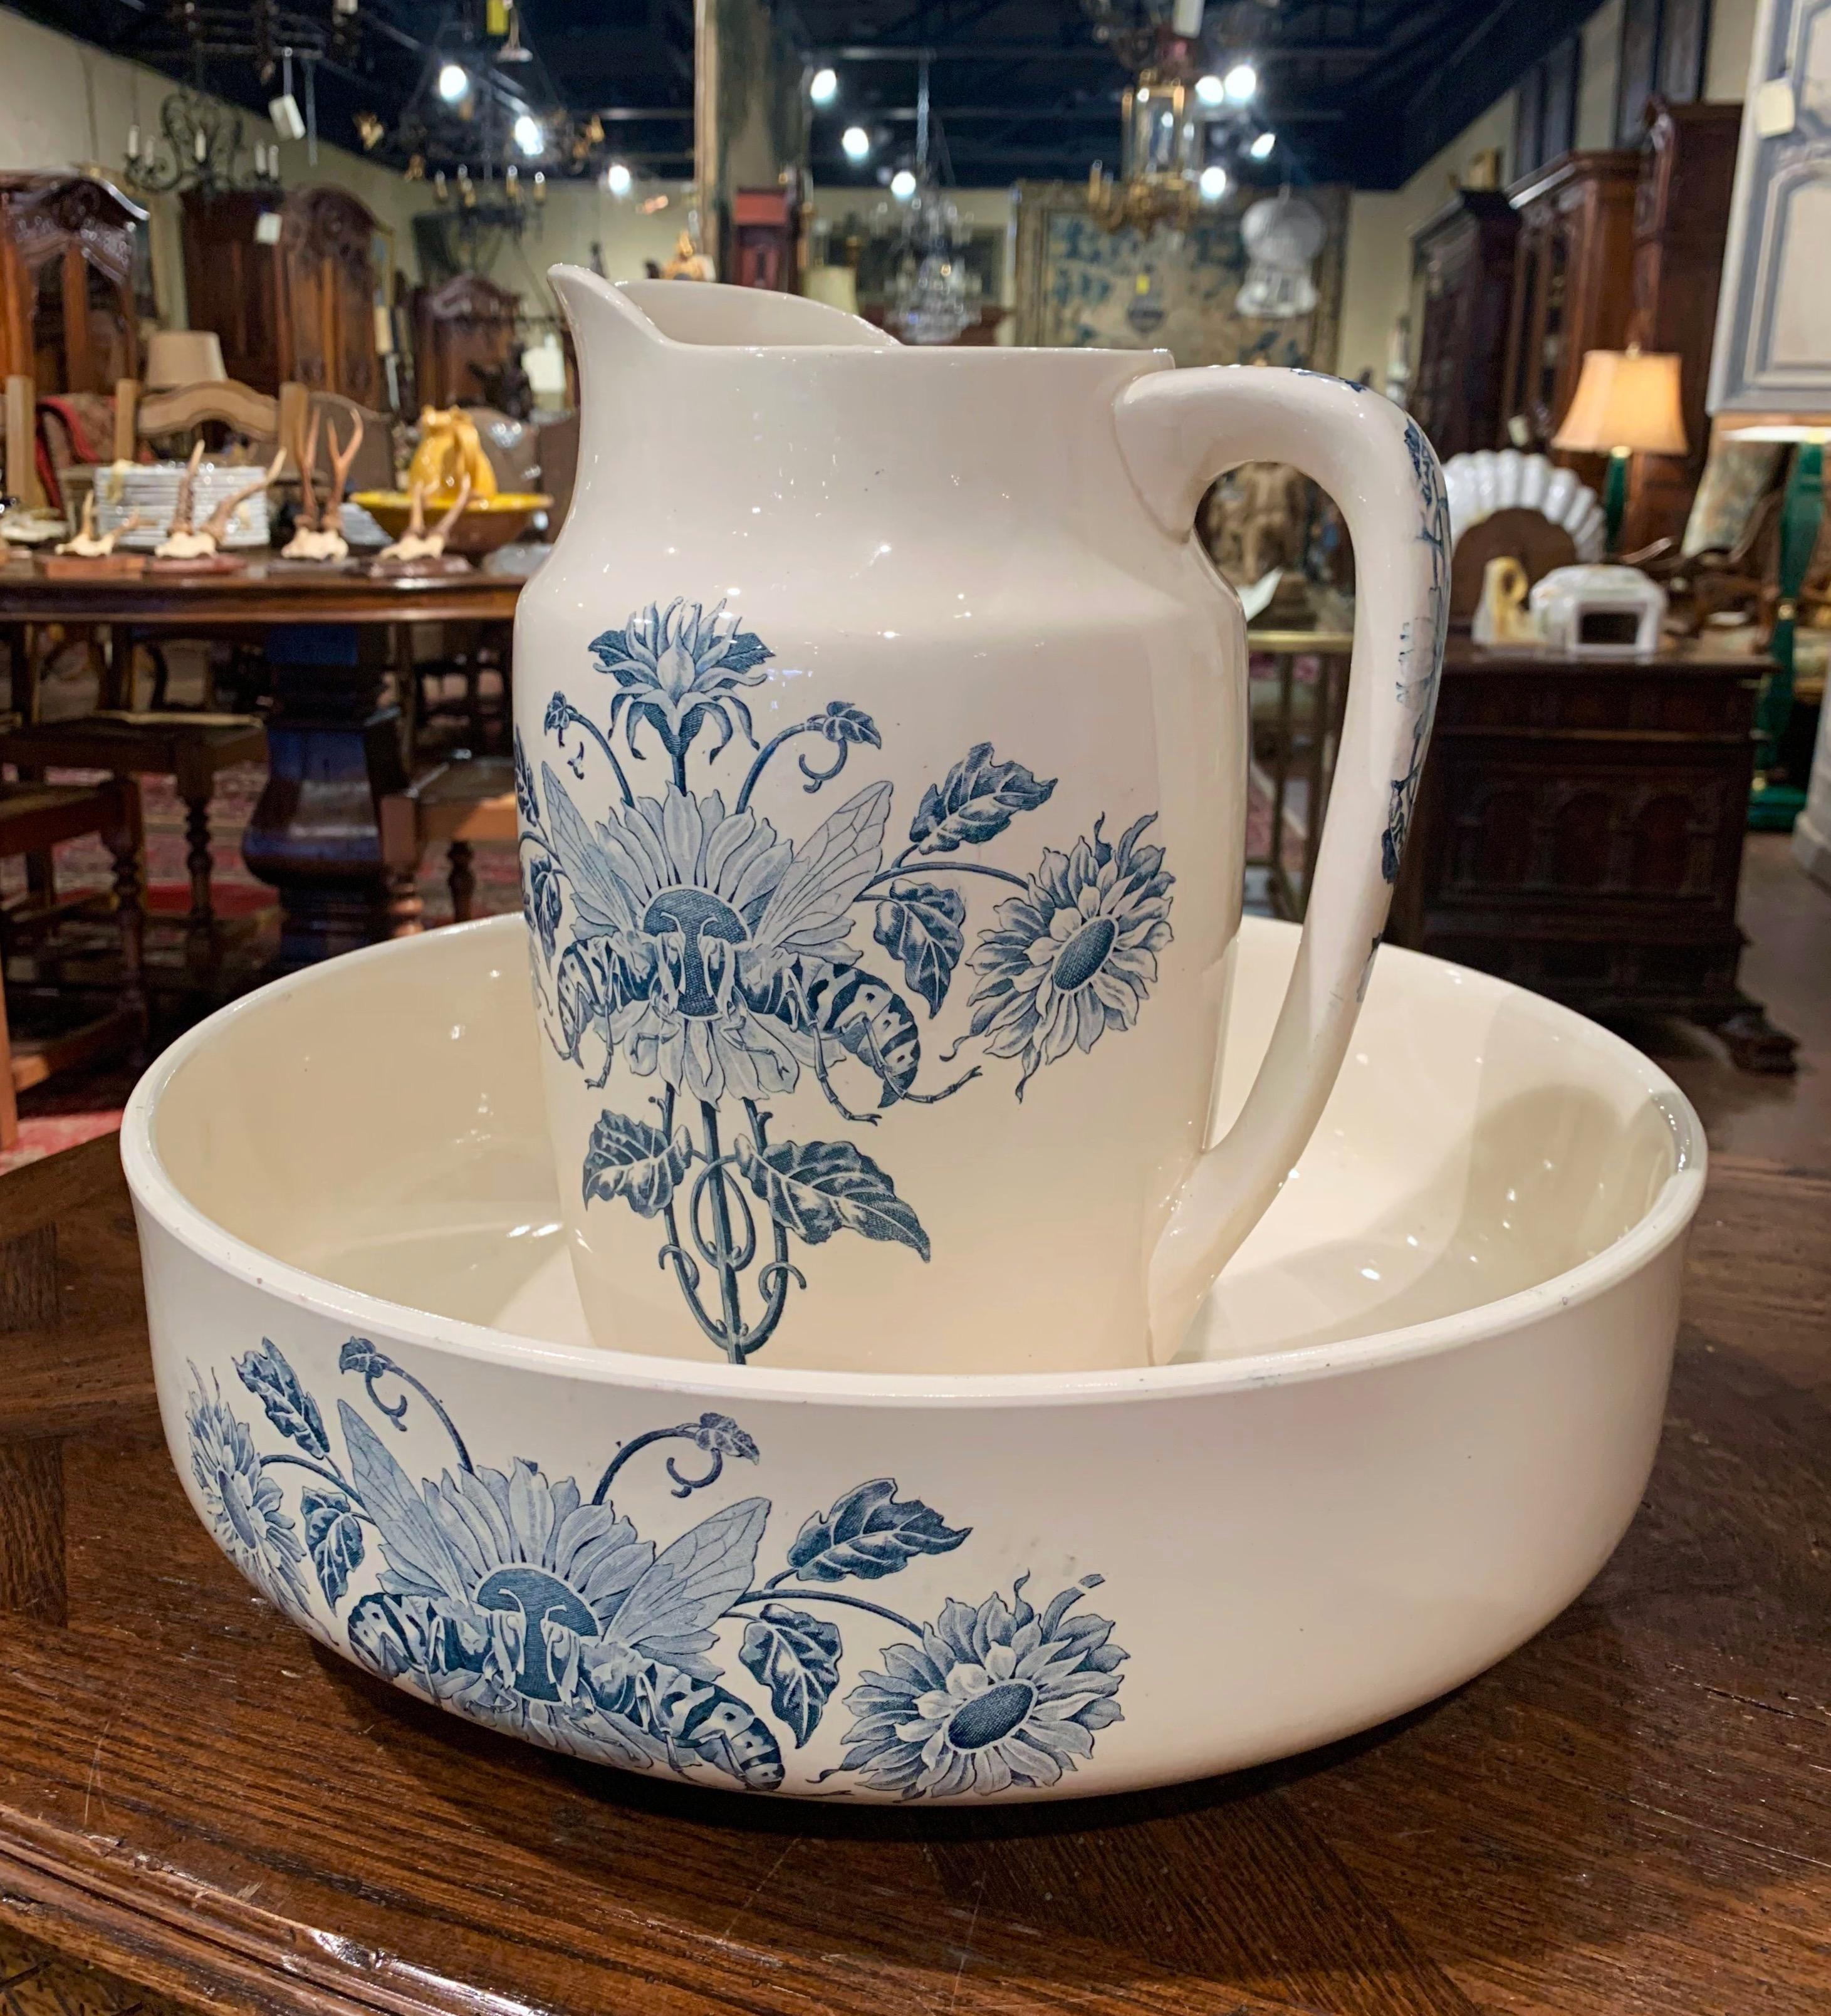 This elegant antique water pitcher with matching bowl were crafted in Longchamp France, circa 1860, typically used to freshen up in the morning, the ceramic set is hand painted with blue and white floral and leaf motifs embellished with two large